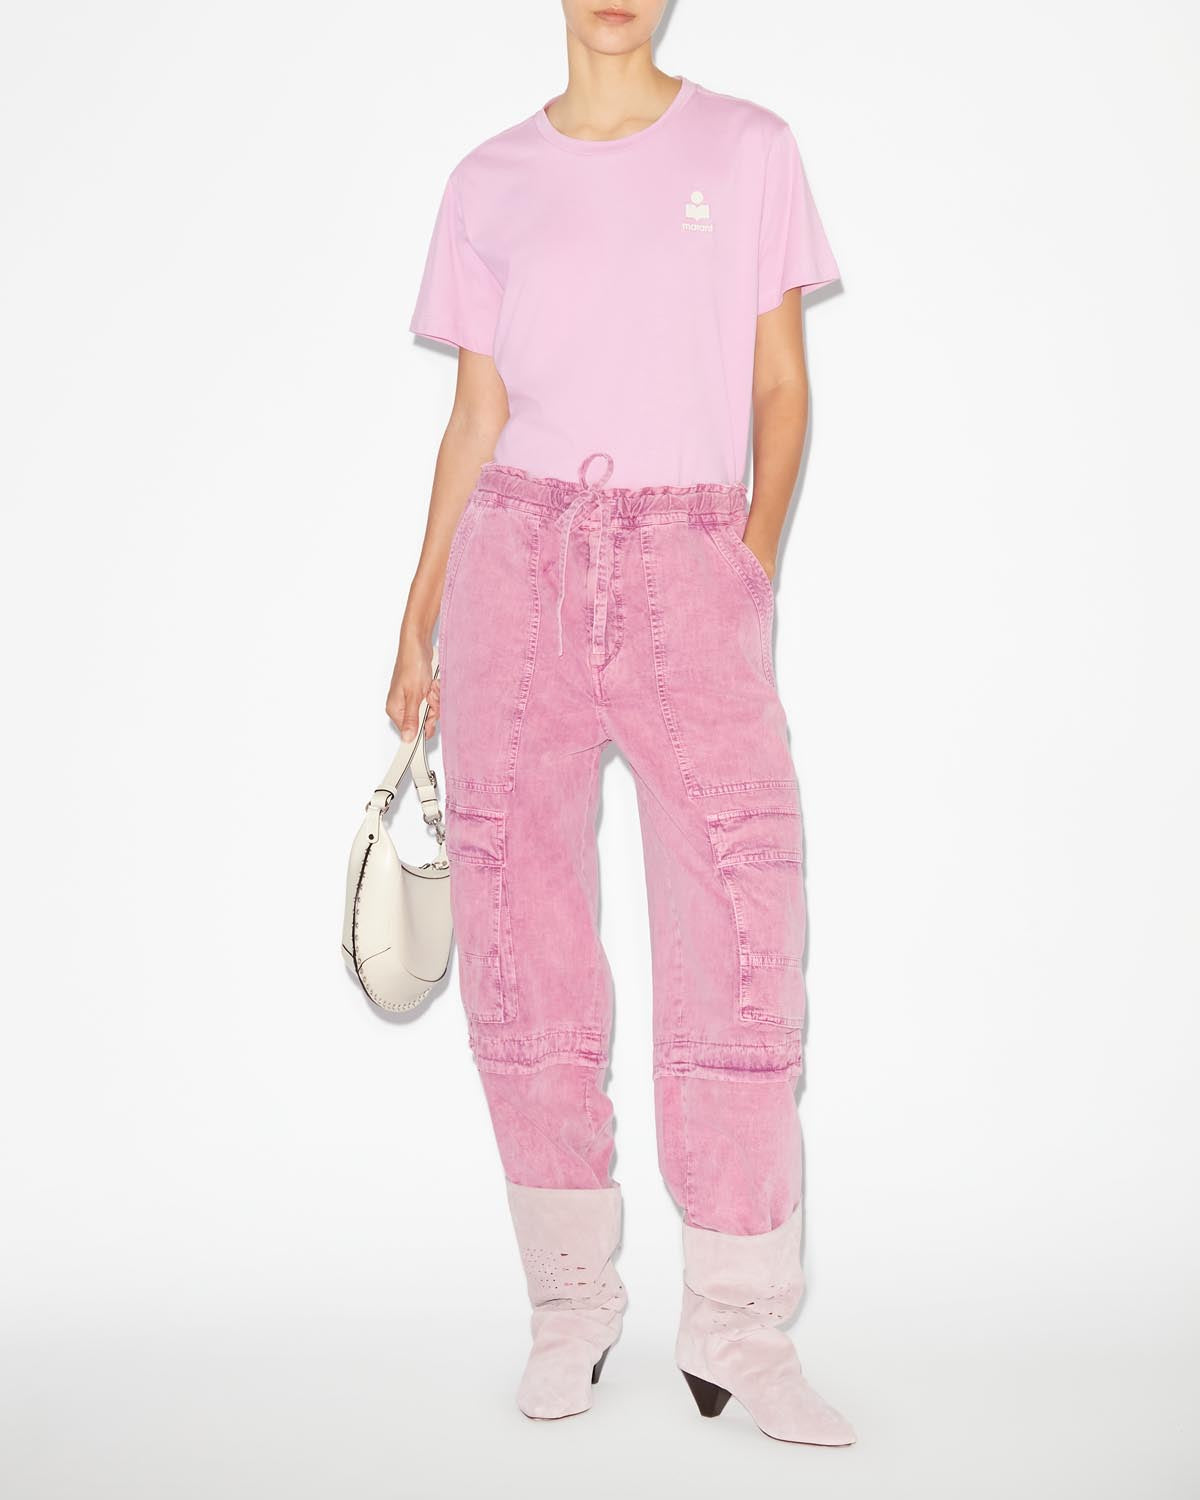 Aby tee-shirt Woman Pink 2